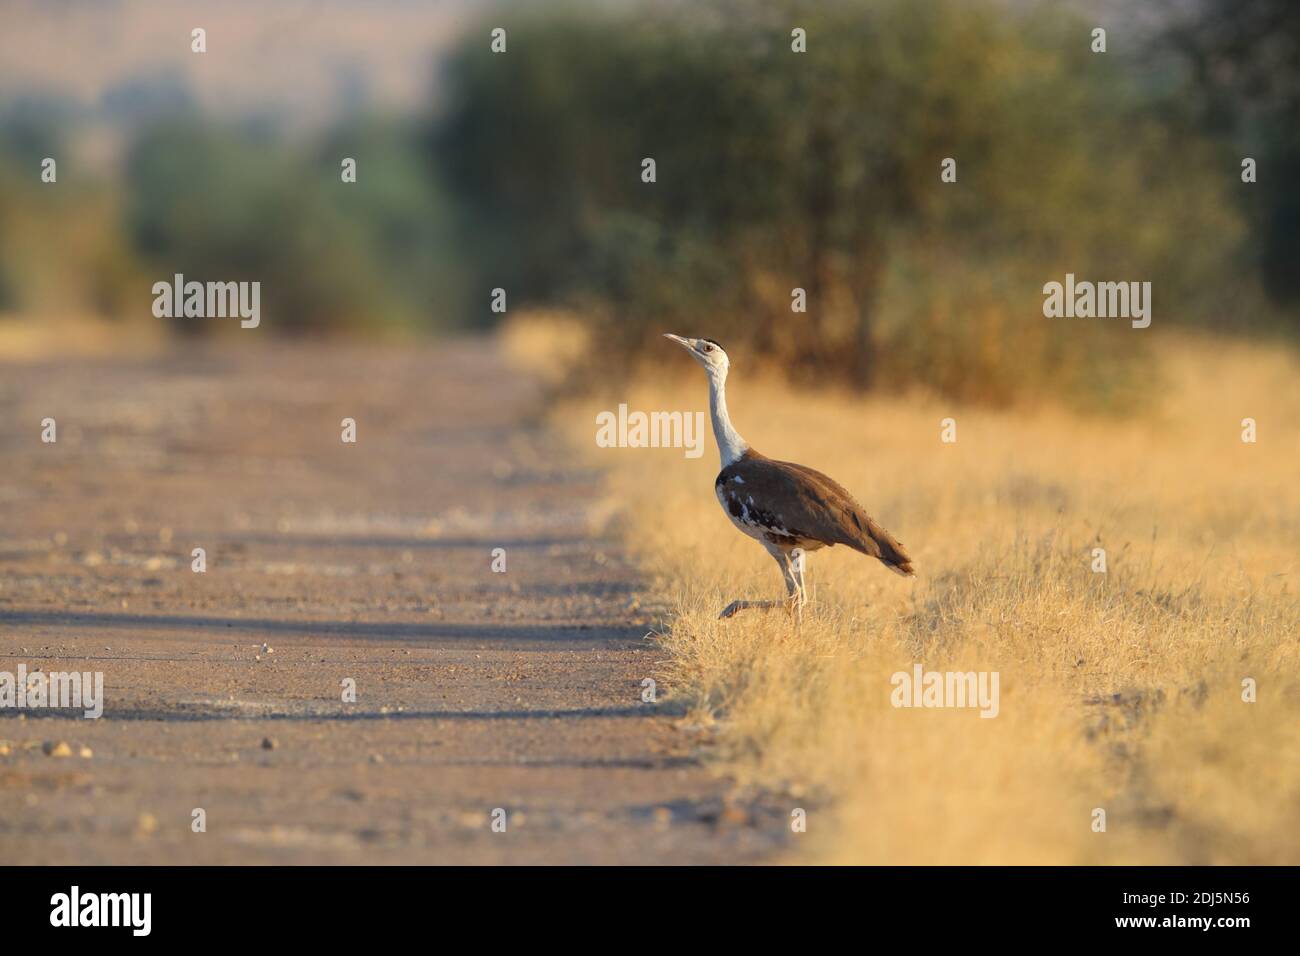 A critically endangered Great Indian Bustard (Ardeotis nigriceps) in Desert National Park, Rajasthan, India Stock Photo